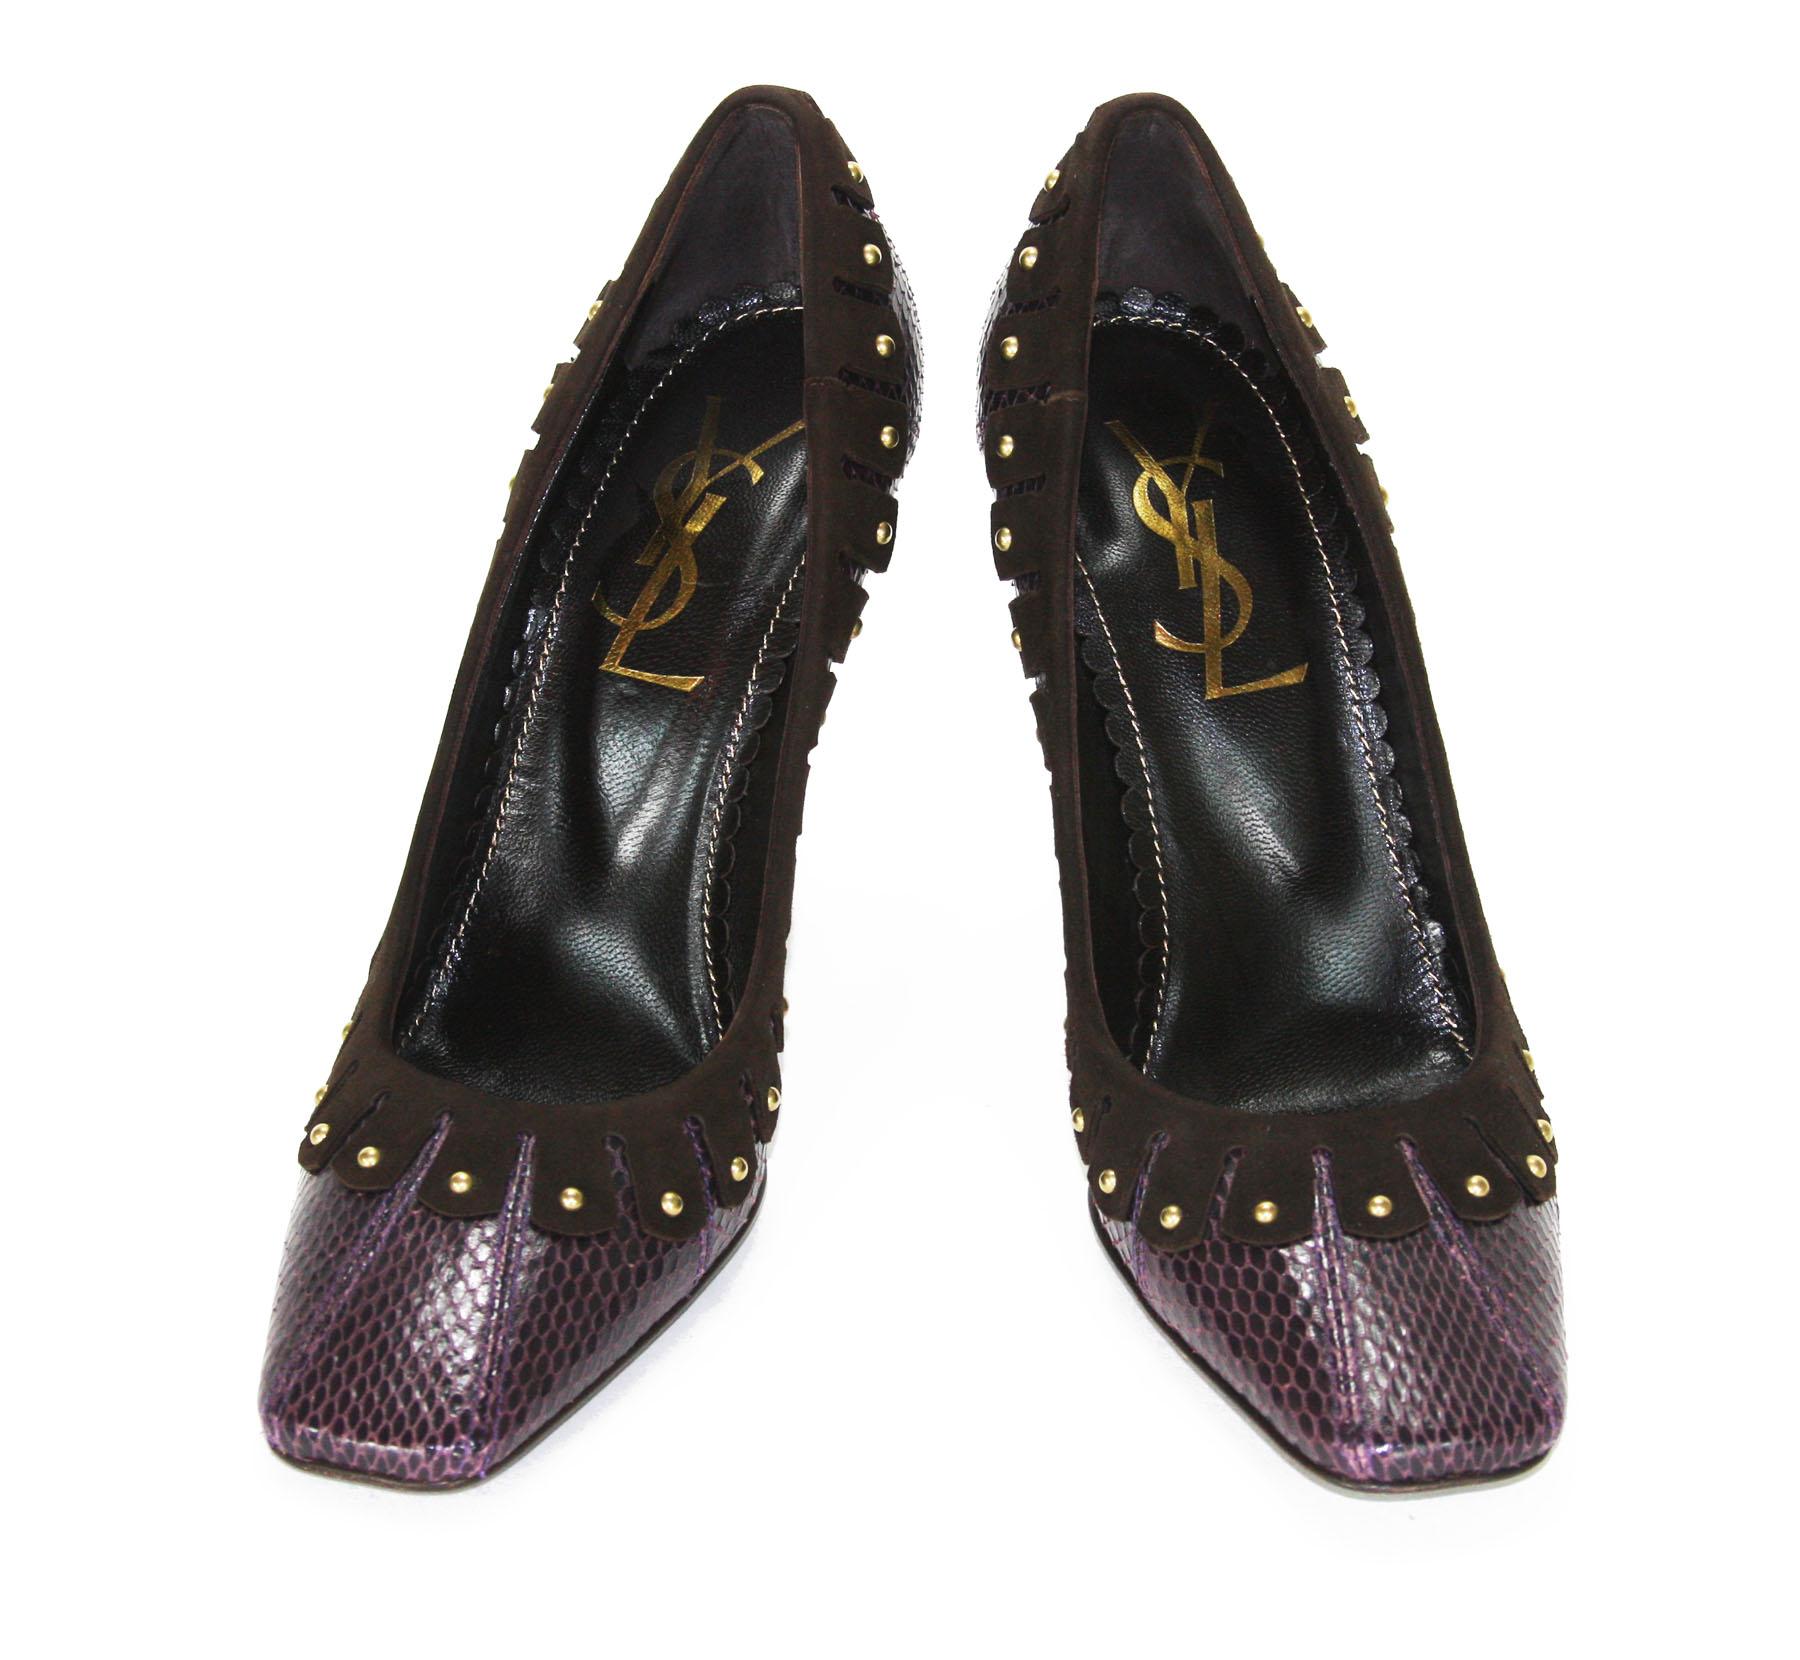 New Tom Ford for Yves Saint Laurent Snake Studded Shoes Pumps
Designer size 37.5 - US 7.5
Snake Skin, Gold-tone Metal Studs, Dark Brown Suede Detail, Square-Toe, Stacked Heel, Leather Sole and Insole.
Stacked Heel Height - 4 inches
Made in